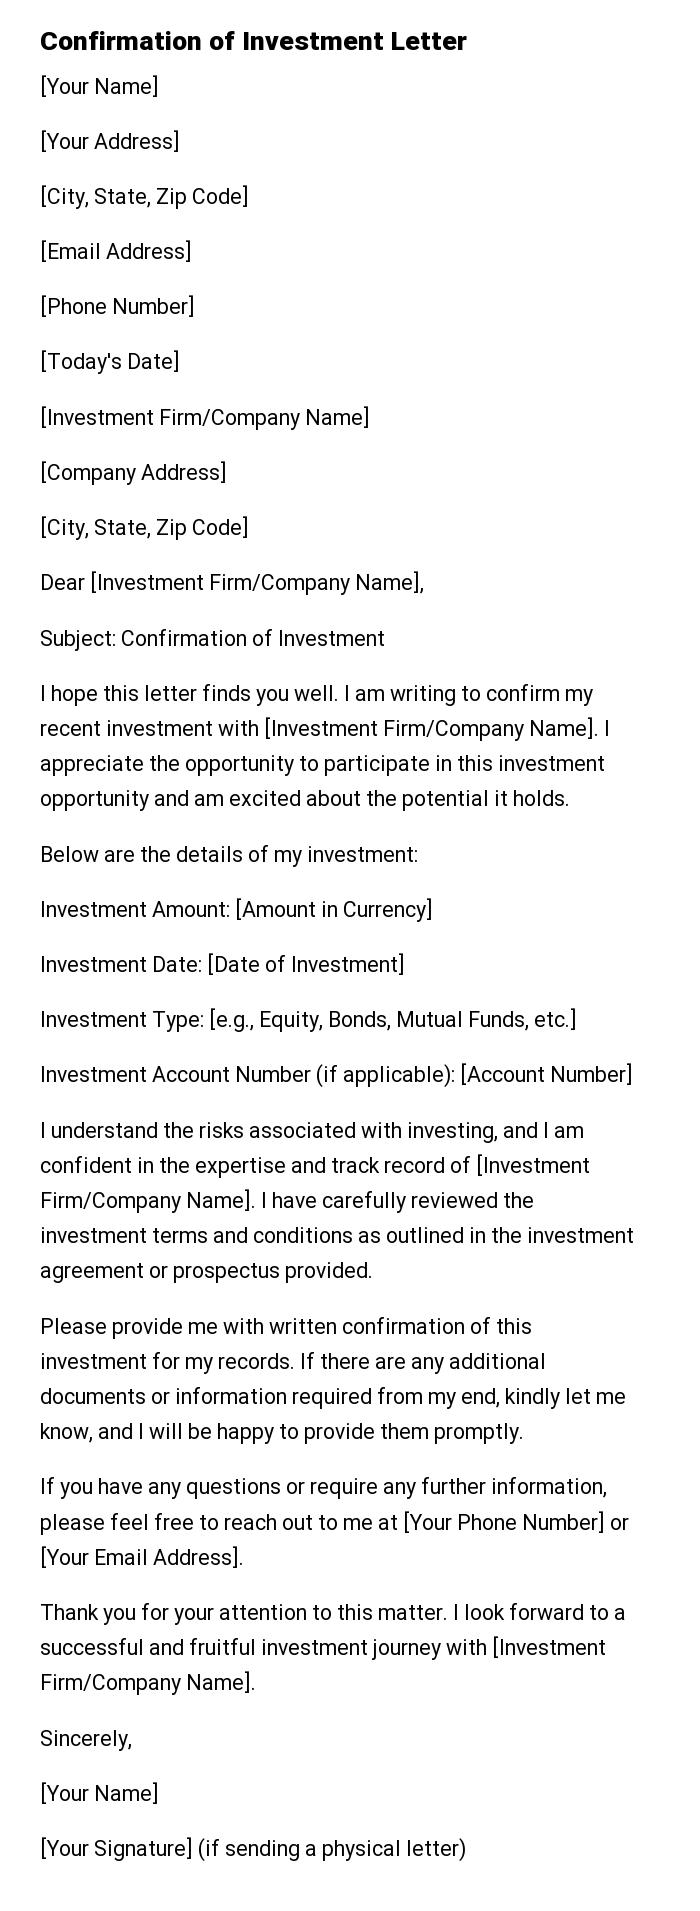 Confirmation of Investment Letter